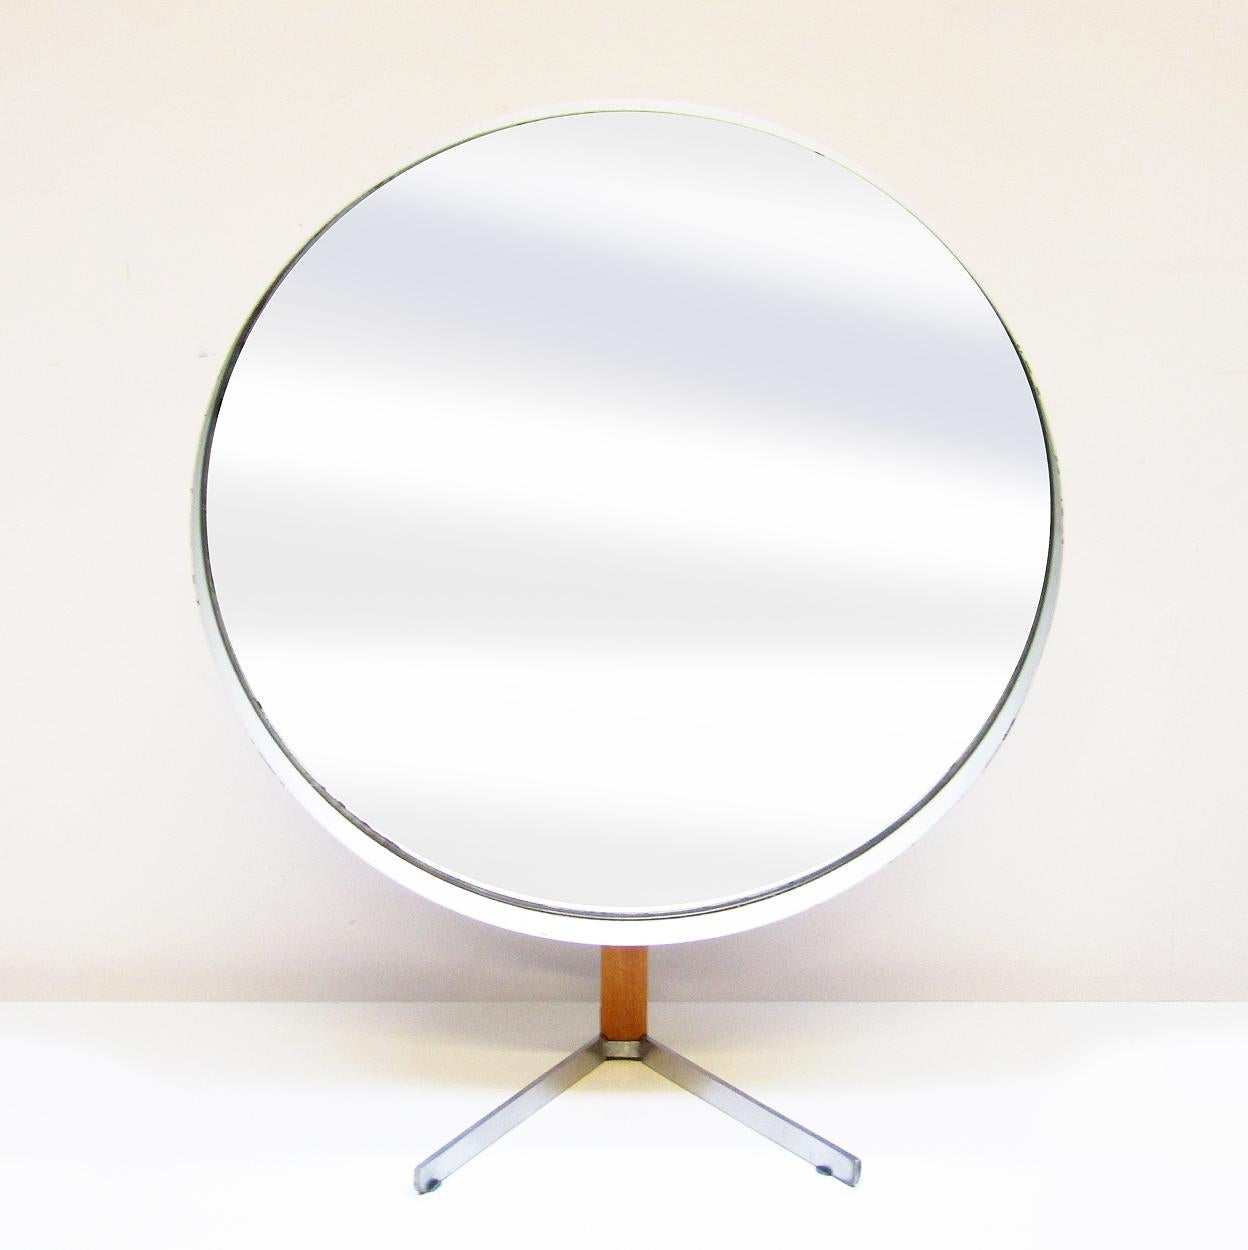 A large, circular, articulated 1960s table mirror by Robert Welch for Durlston Designs.

The mirror is 36cm (14